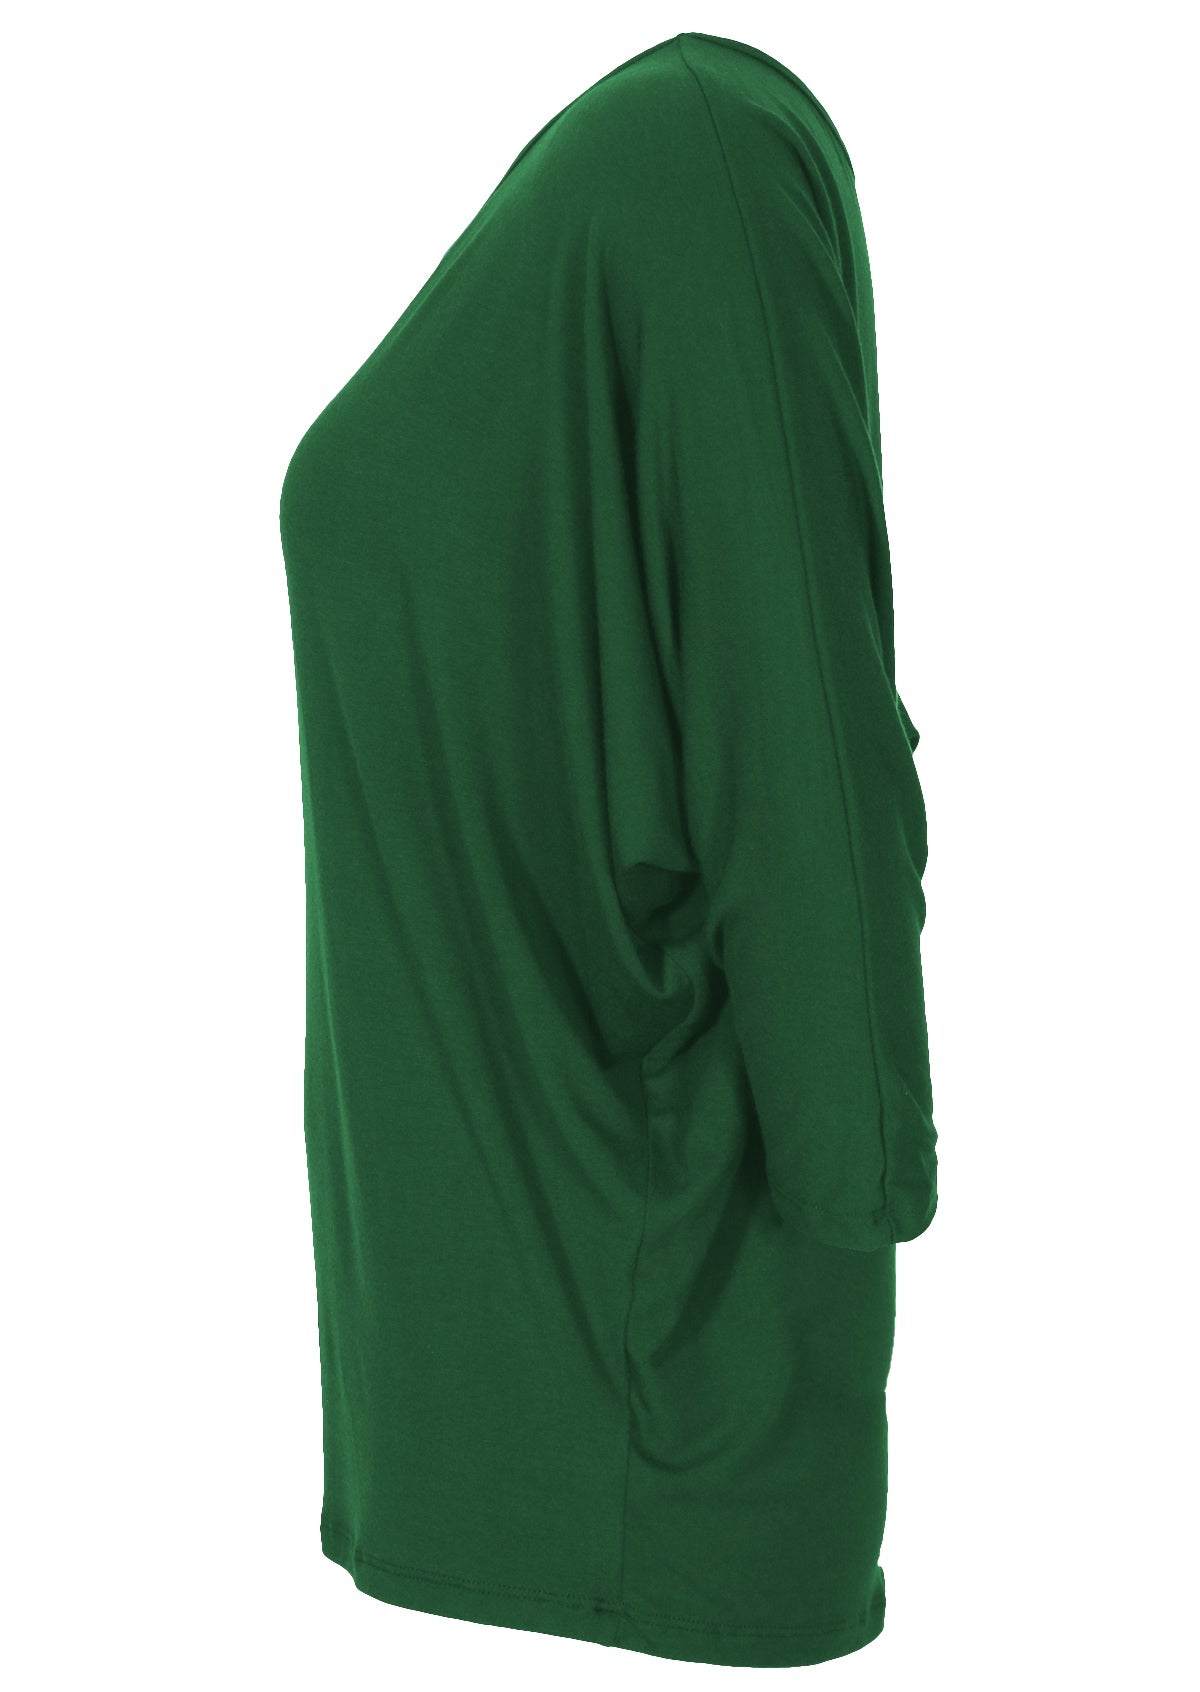 Side view of loose fitted women's green 3/4 sleeve top